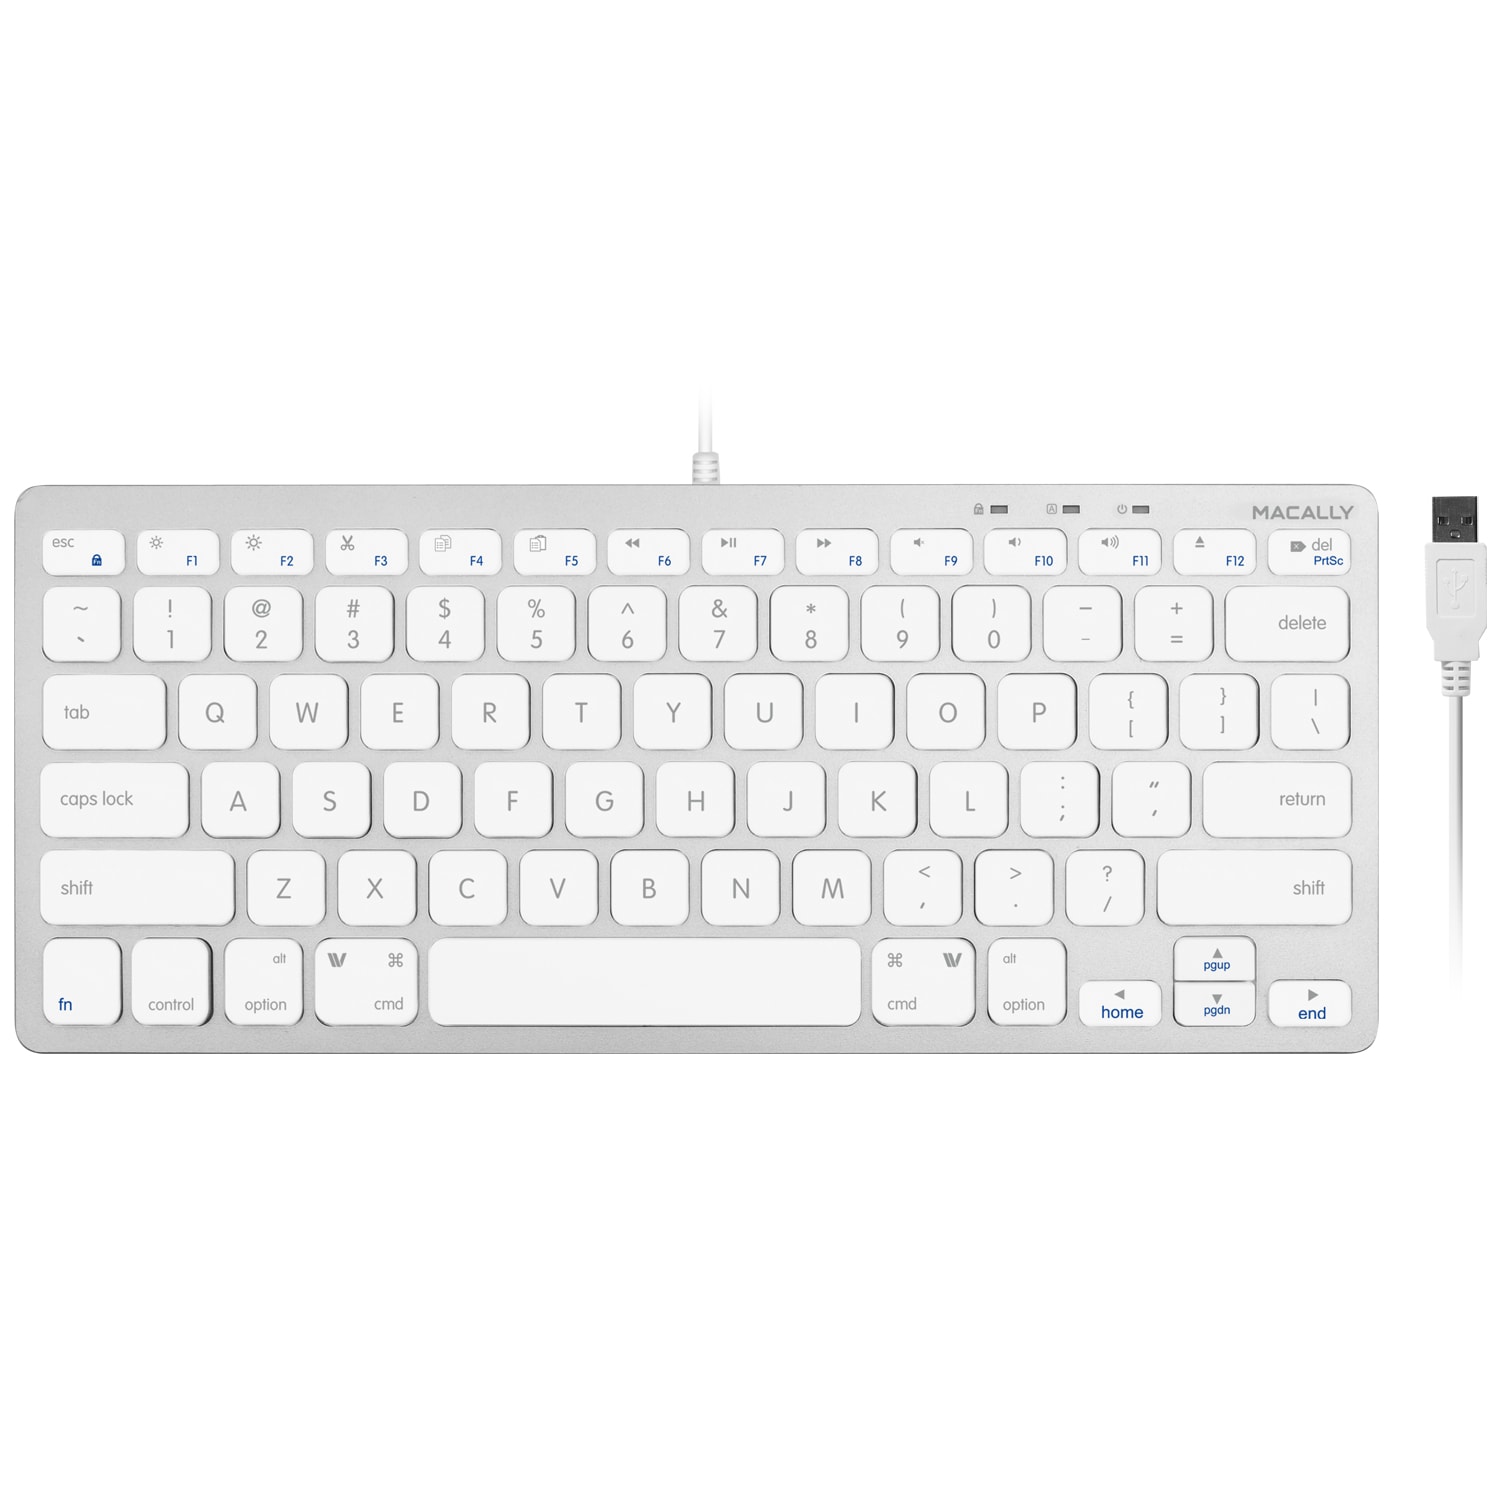 Ideel fisk og skaldyr tilbagebetaling Macally Macally Slim USB Wired Small Compact Aluminum Mini Computer  Keyboard for Apple Mac, iMac, MacBook Pro/Air, Mac Mini, Windows PC  Desktops, Laptop (SLIMKEYCA) in the Computers & Peripherals department at  Lowes.com